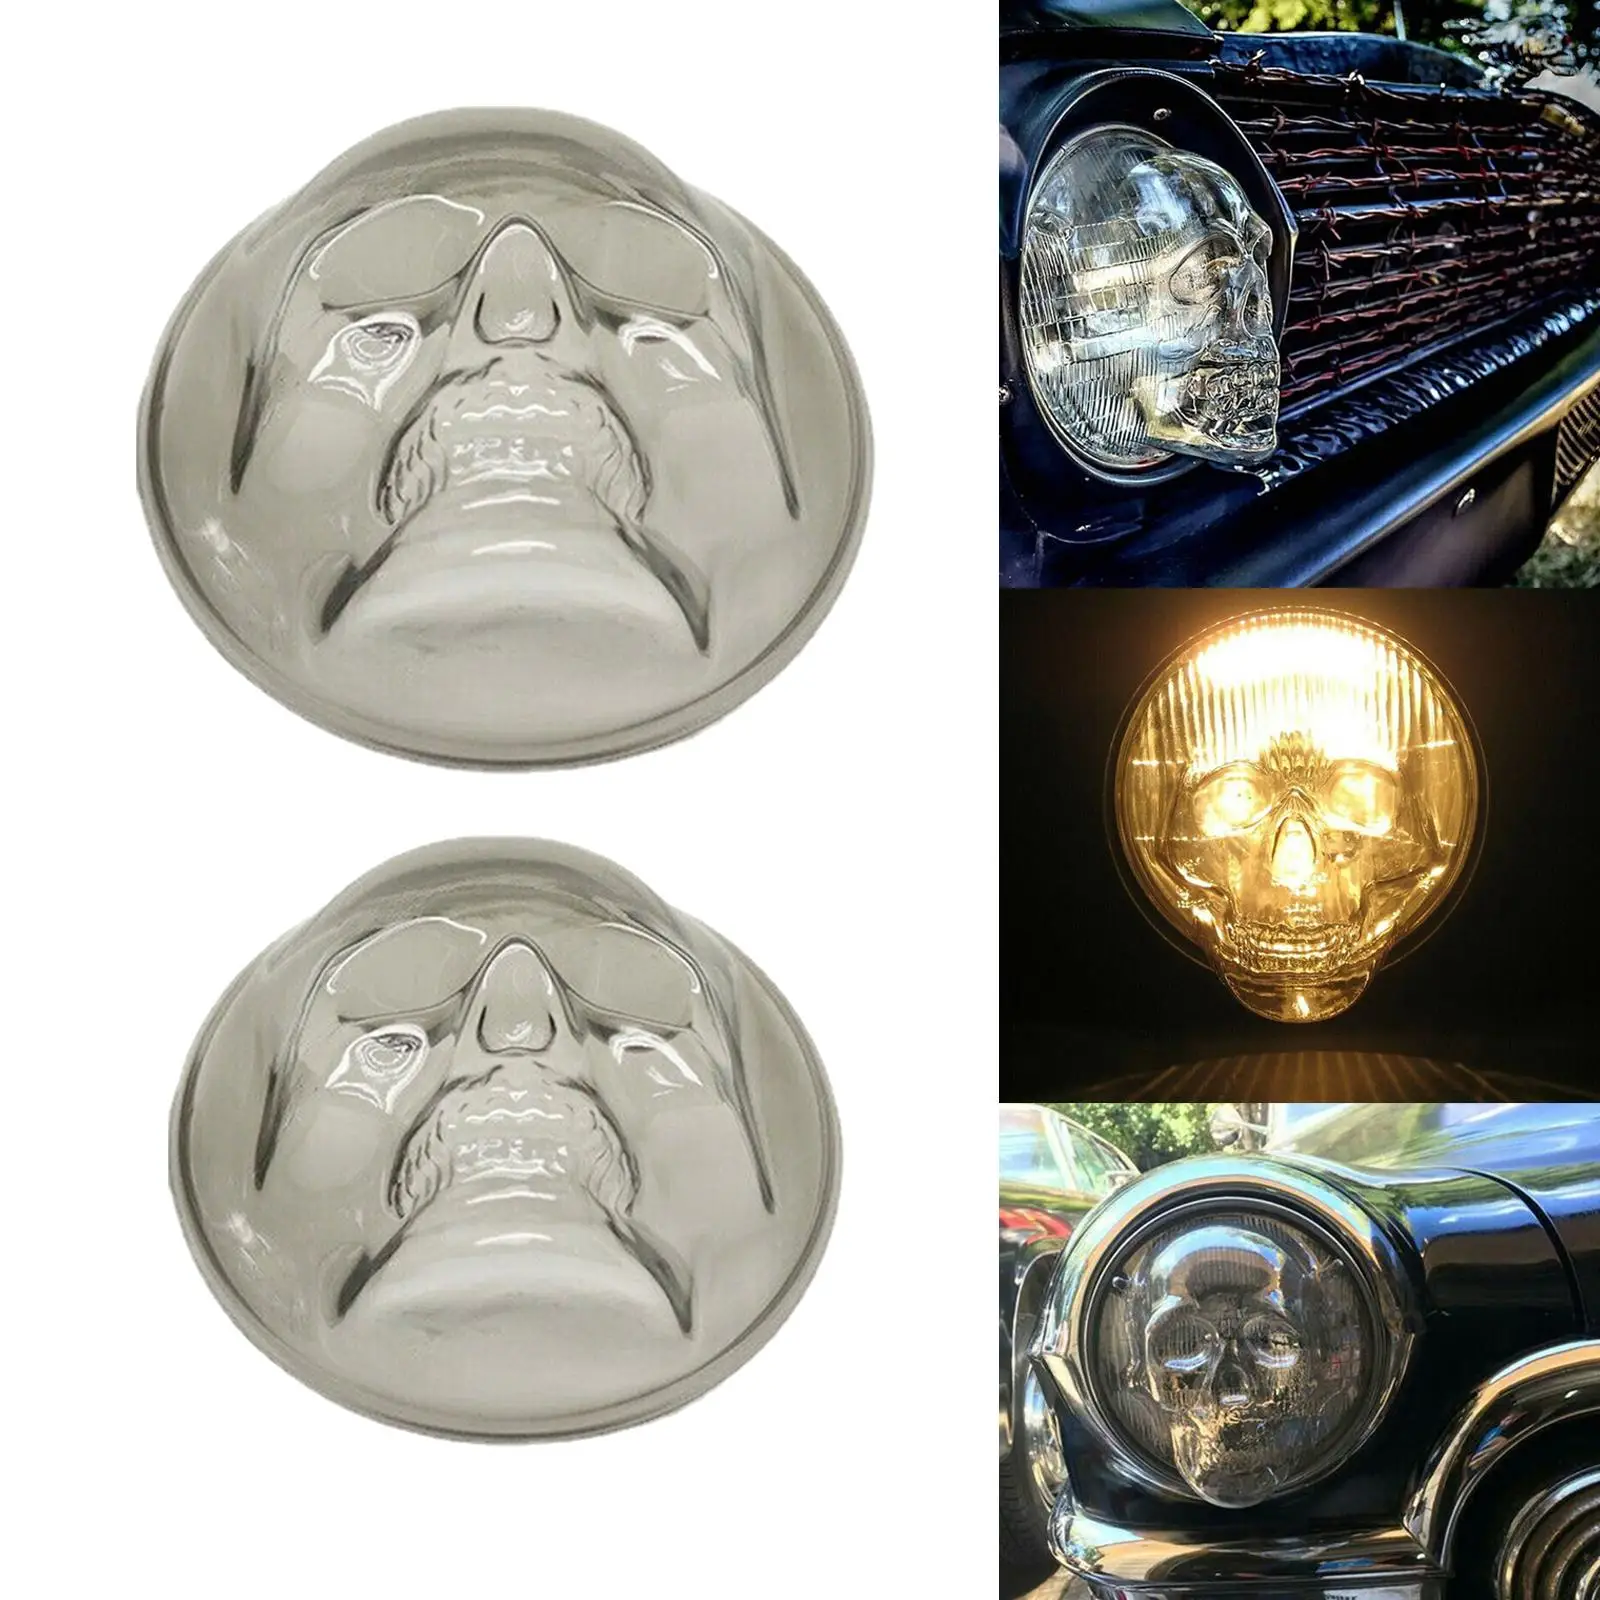 Skull Headlight Covers PC Resin Material Easy to Install Mounting Decorative Lamp Covers Replacement Parts for Car Truck